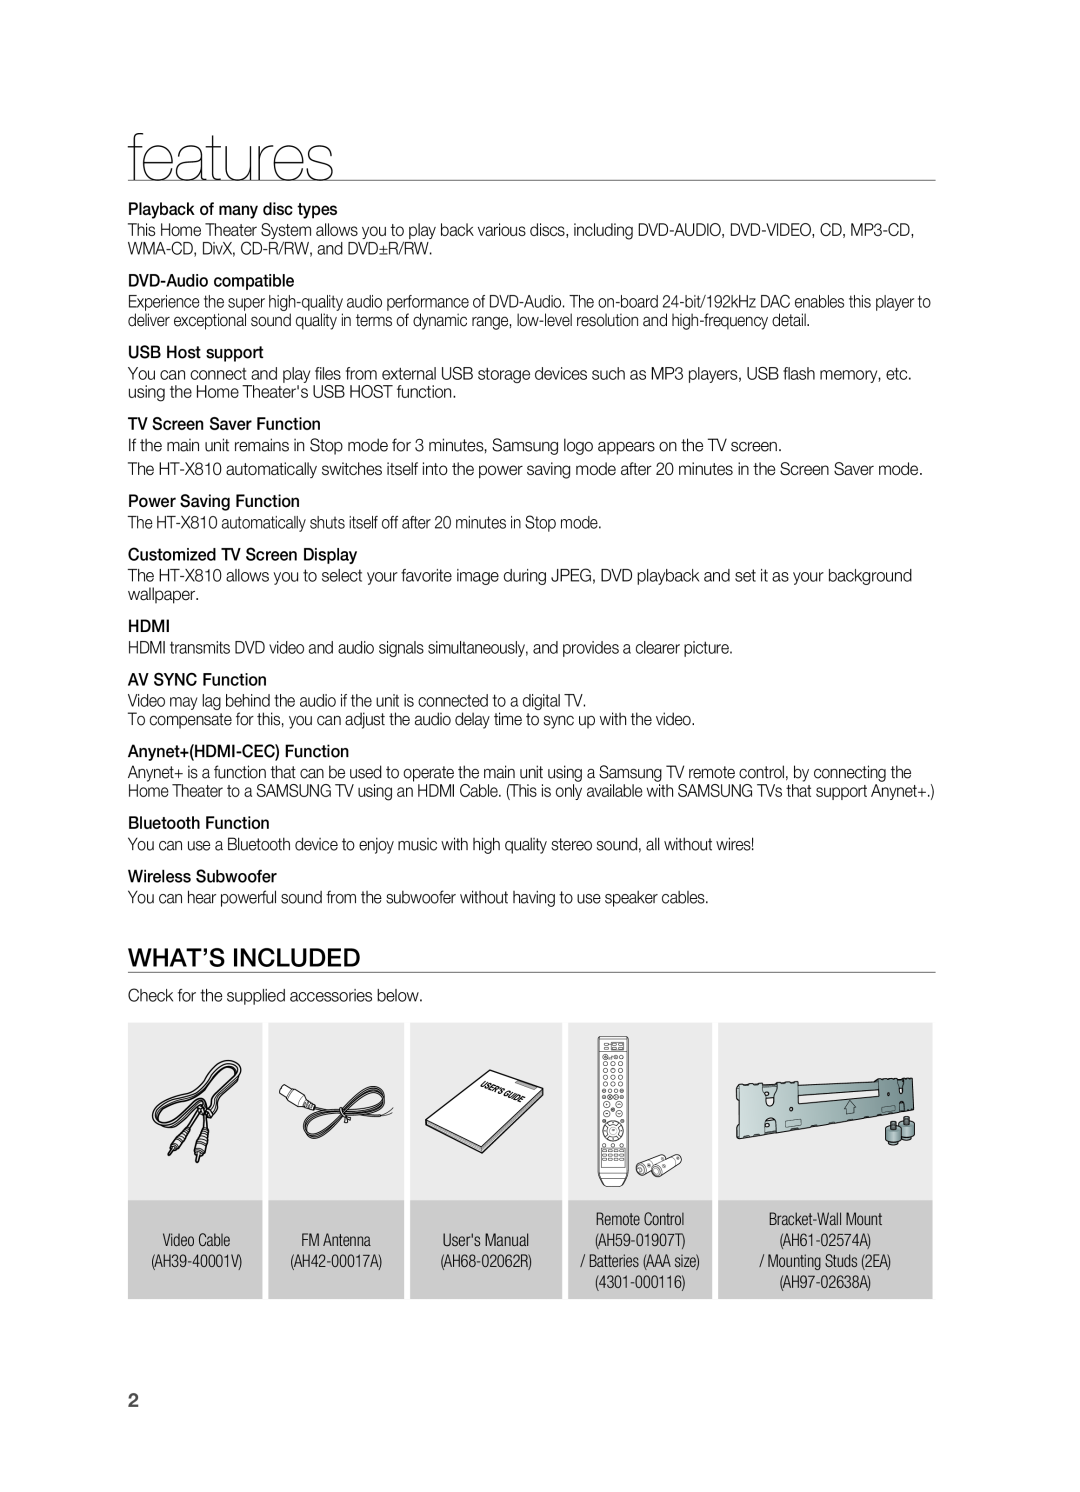 Samsung HT-X810 user manual features, What’s included 